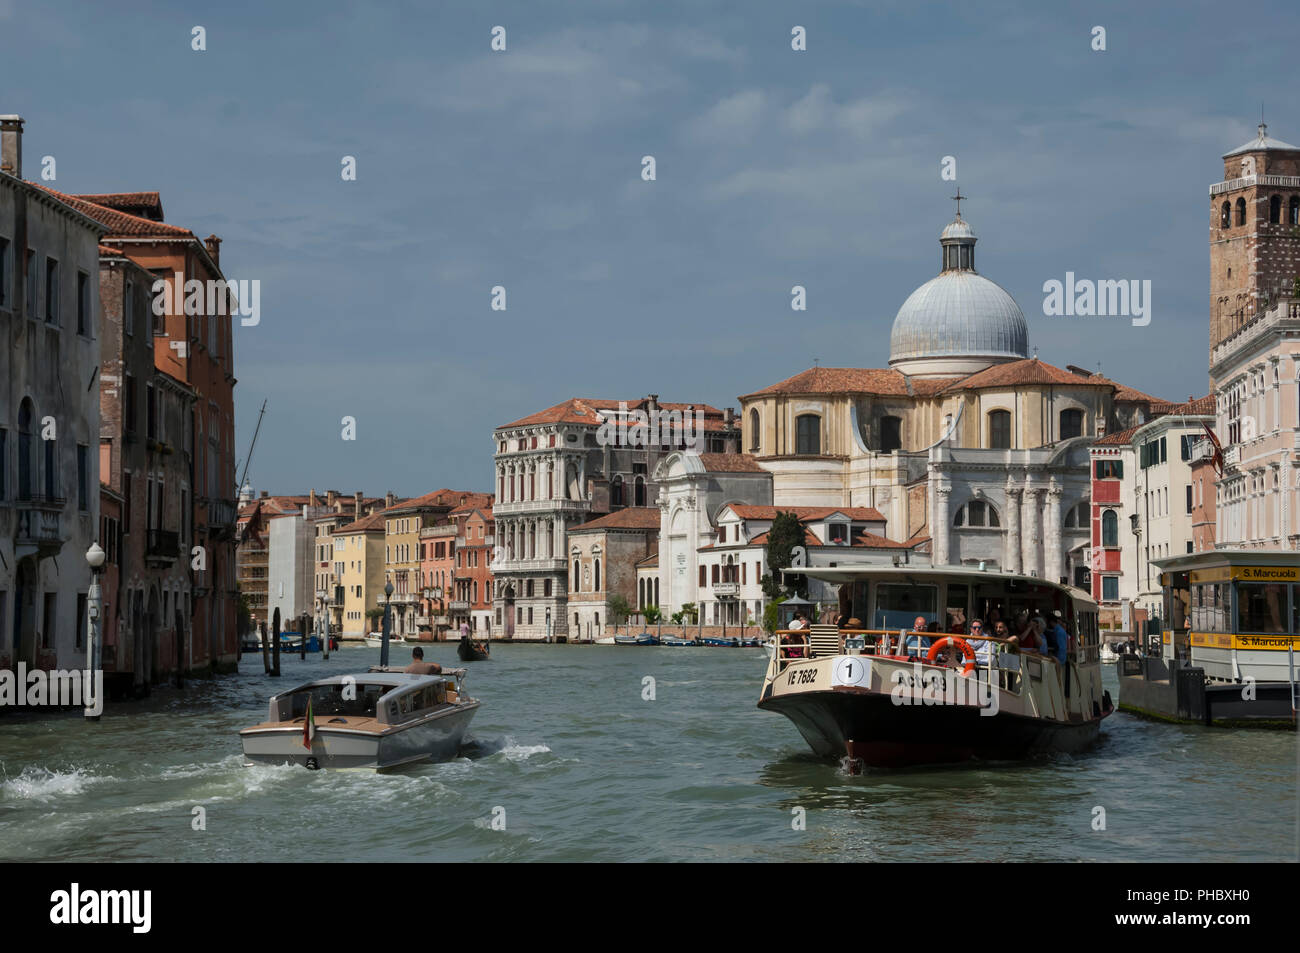 Water bus and taxi, Grand Canal at Marcuola, Venice, UNESCO World Heritage Site, Veneto, Italy, Europe Stock Photo